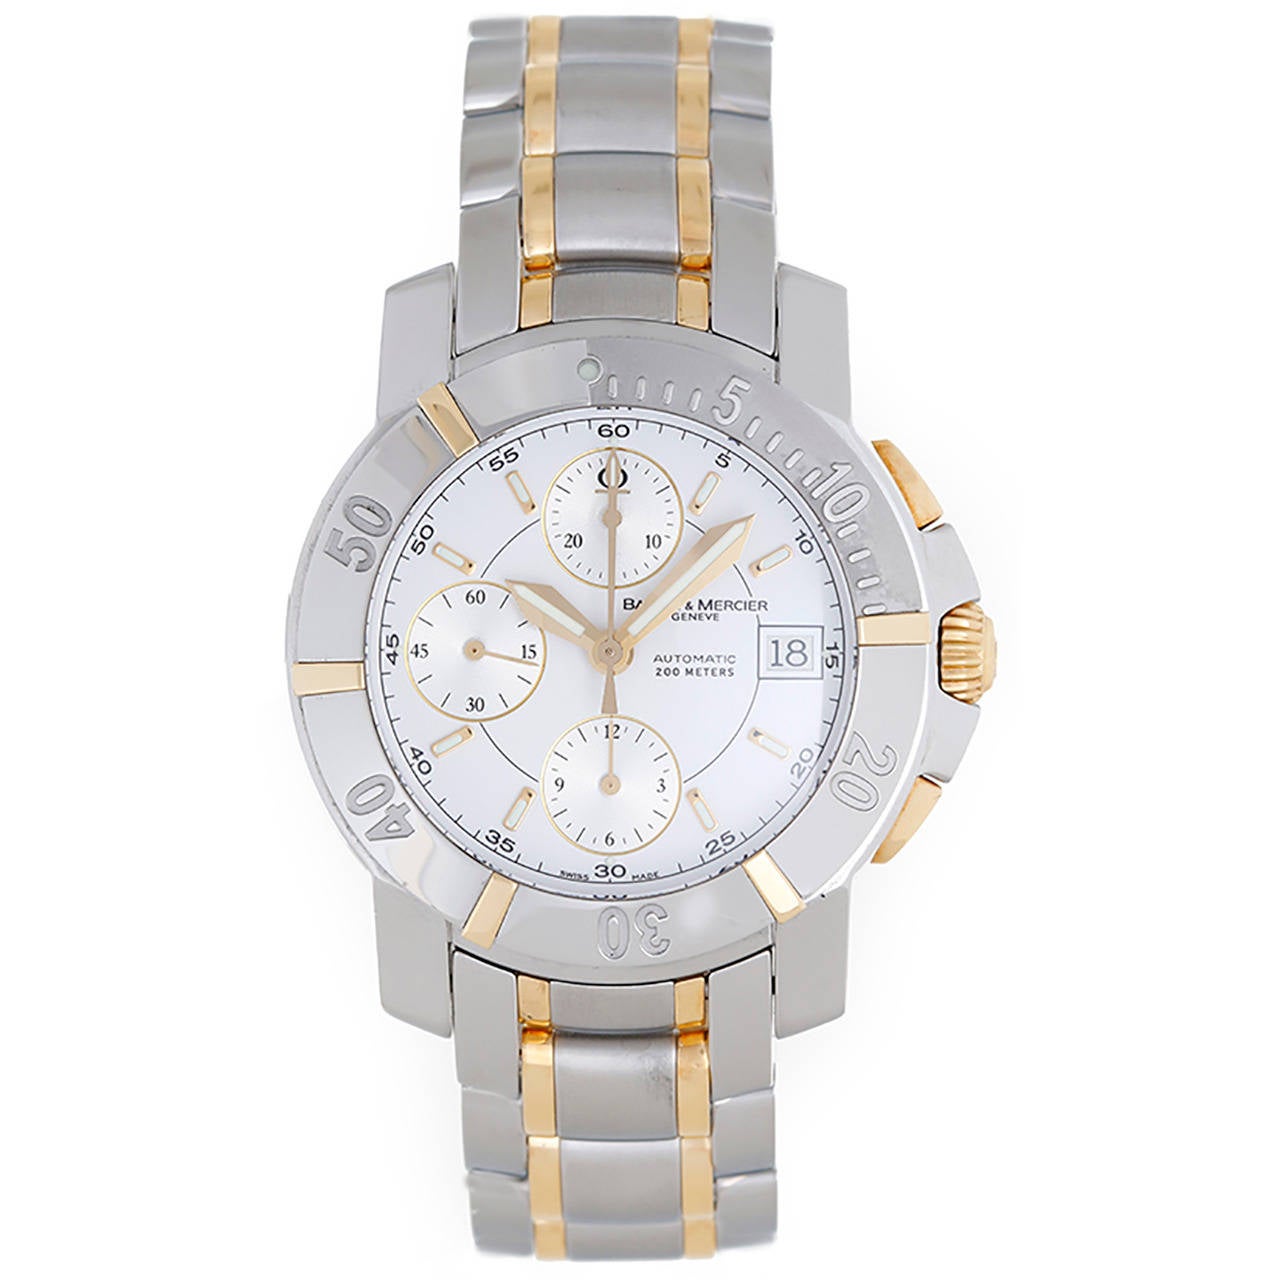 Baume & Mercier Stainless Steel Yellow Gold Capeland Chronograph Wristwatch